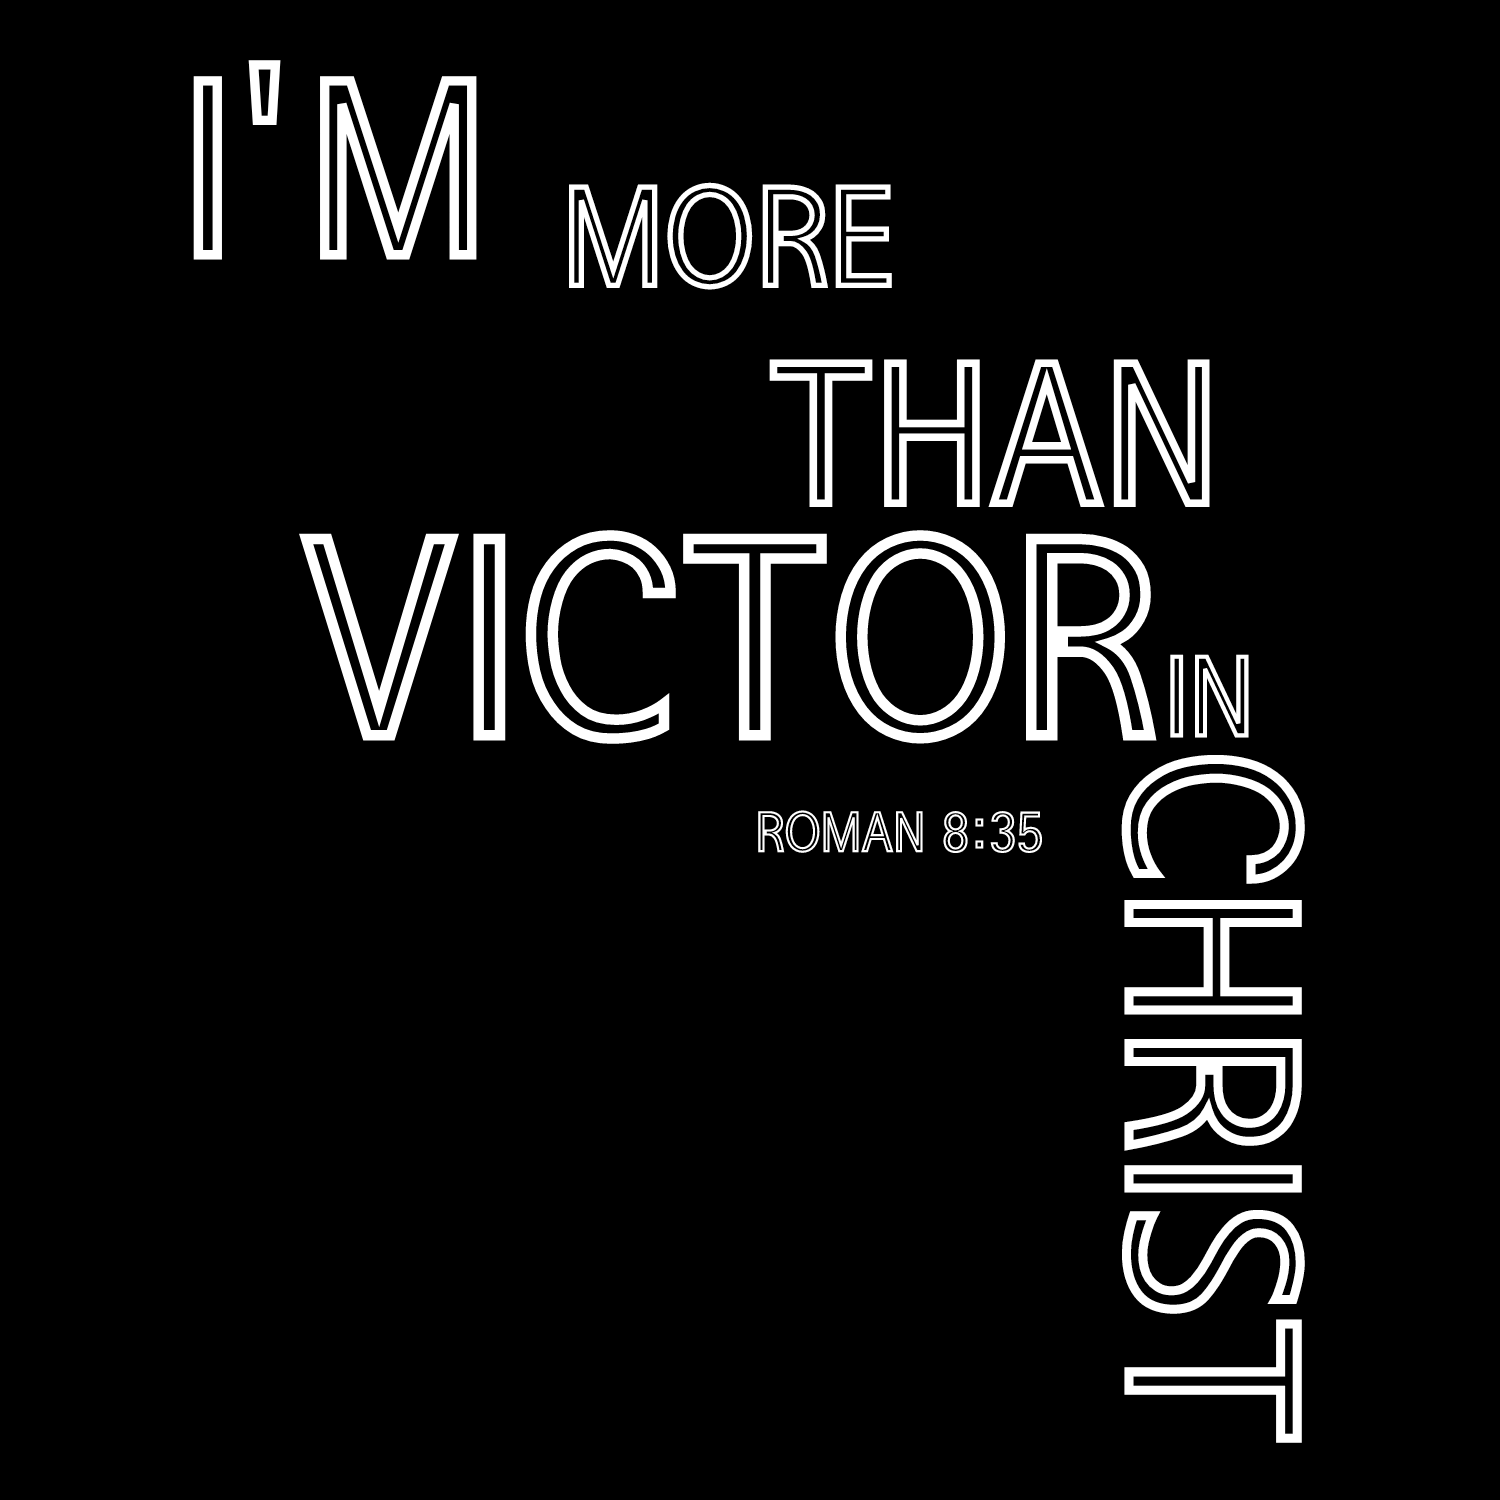 I'm more victor in Christ